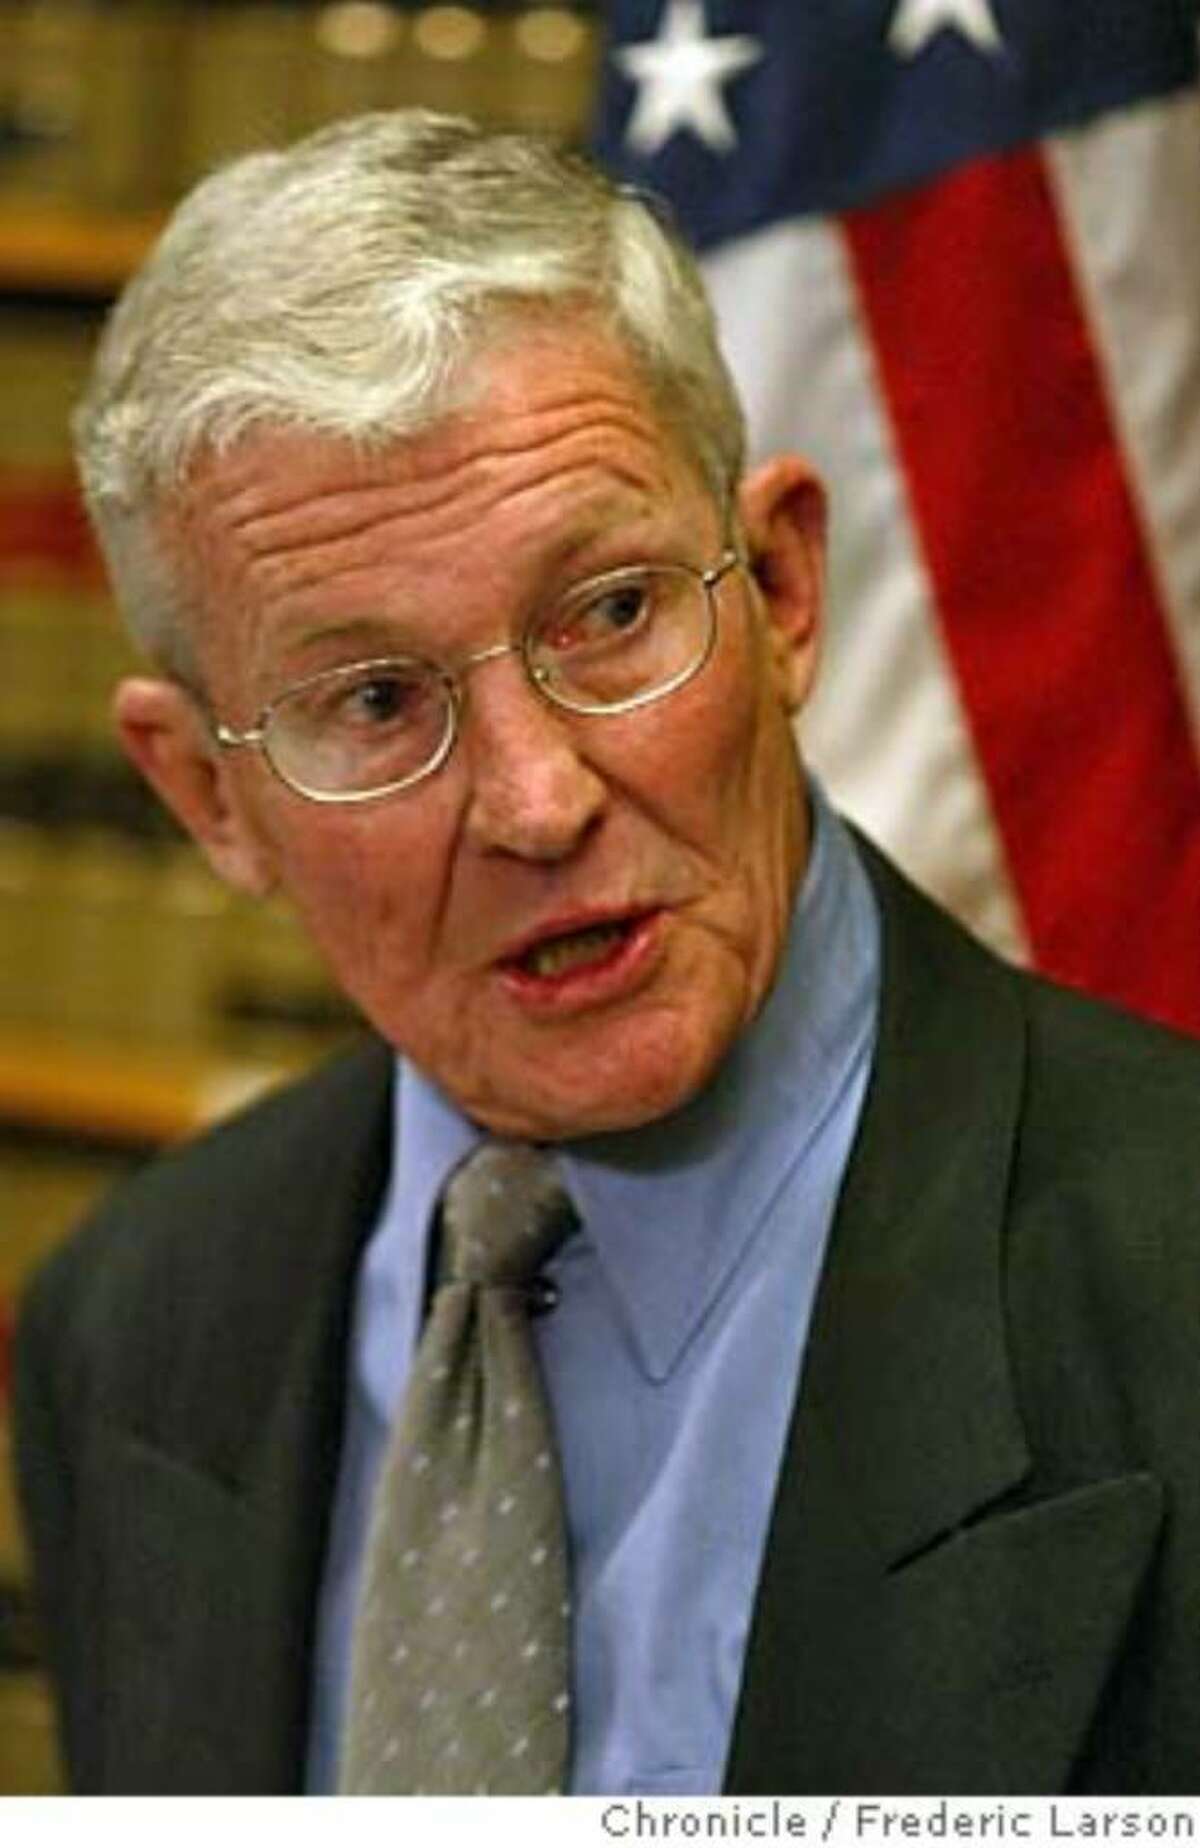 SFCOPS04g-C-03MAR03-MT-FRL: SF District Attorney Terence Hallinan in 2003. 